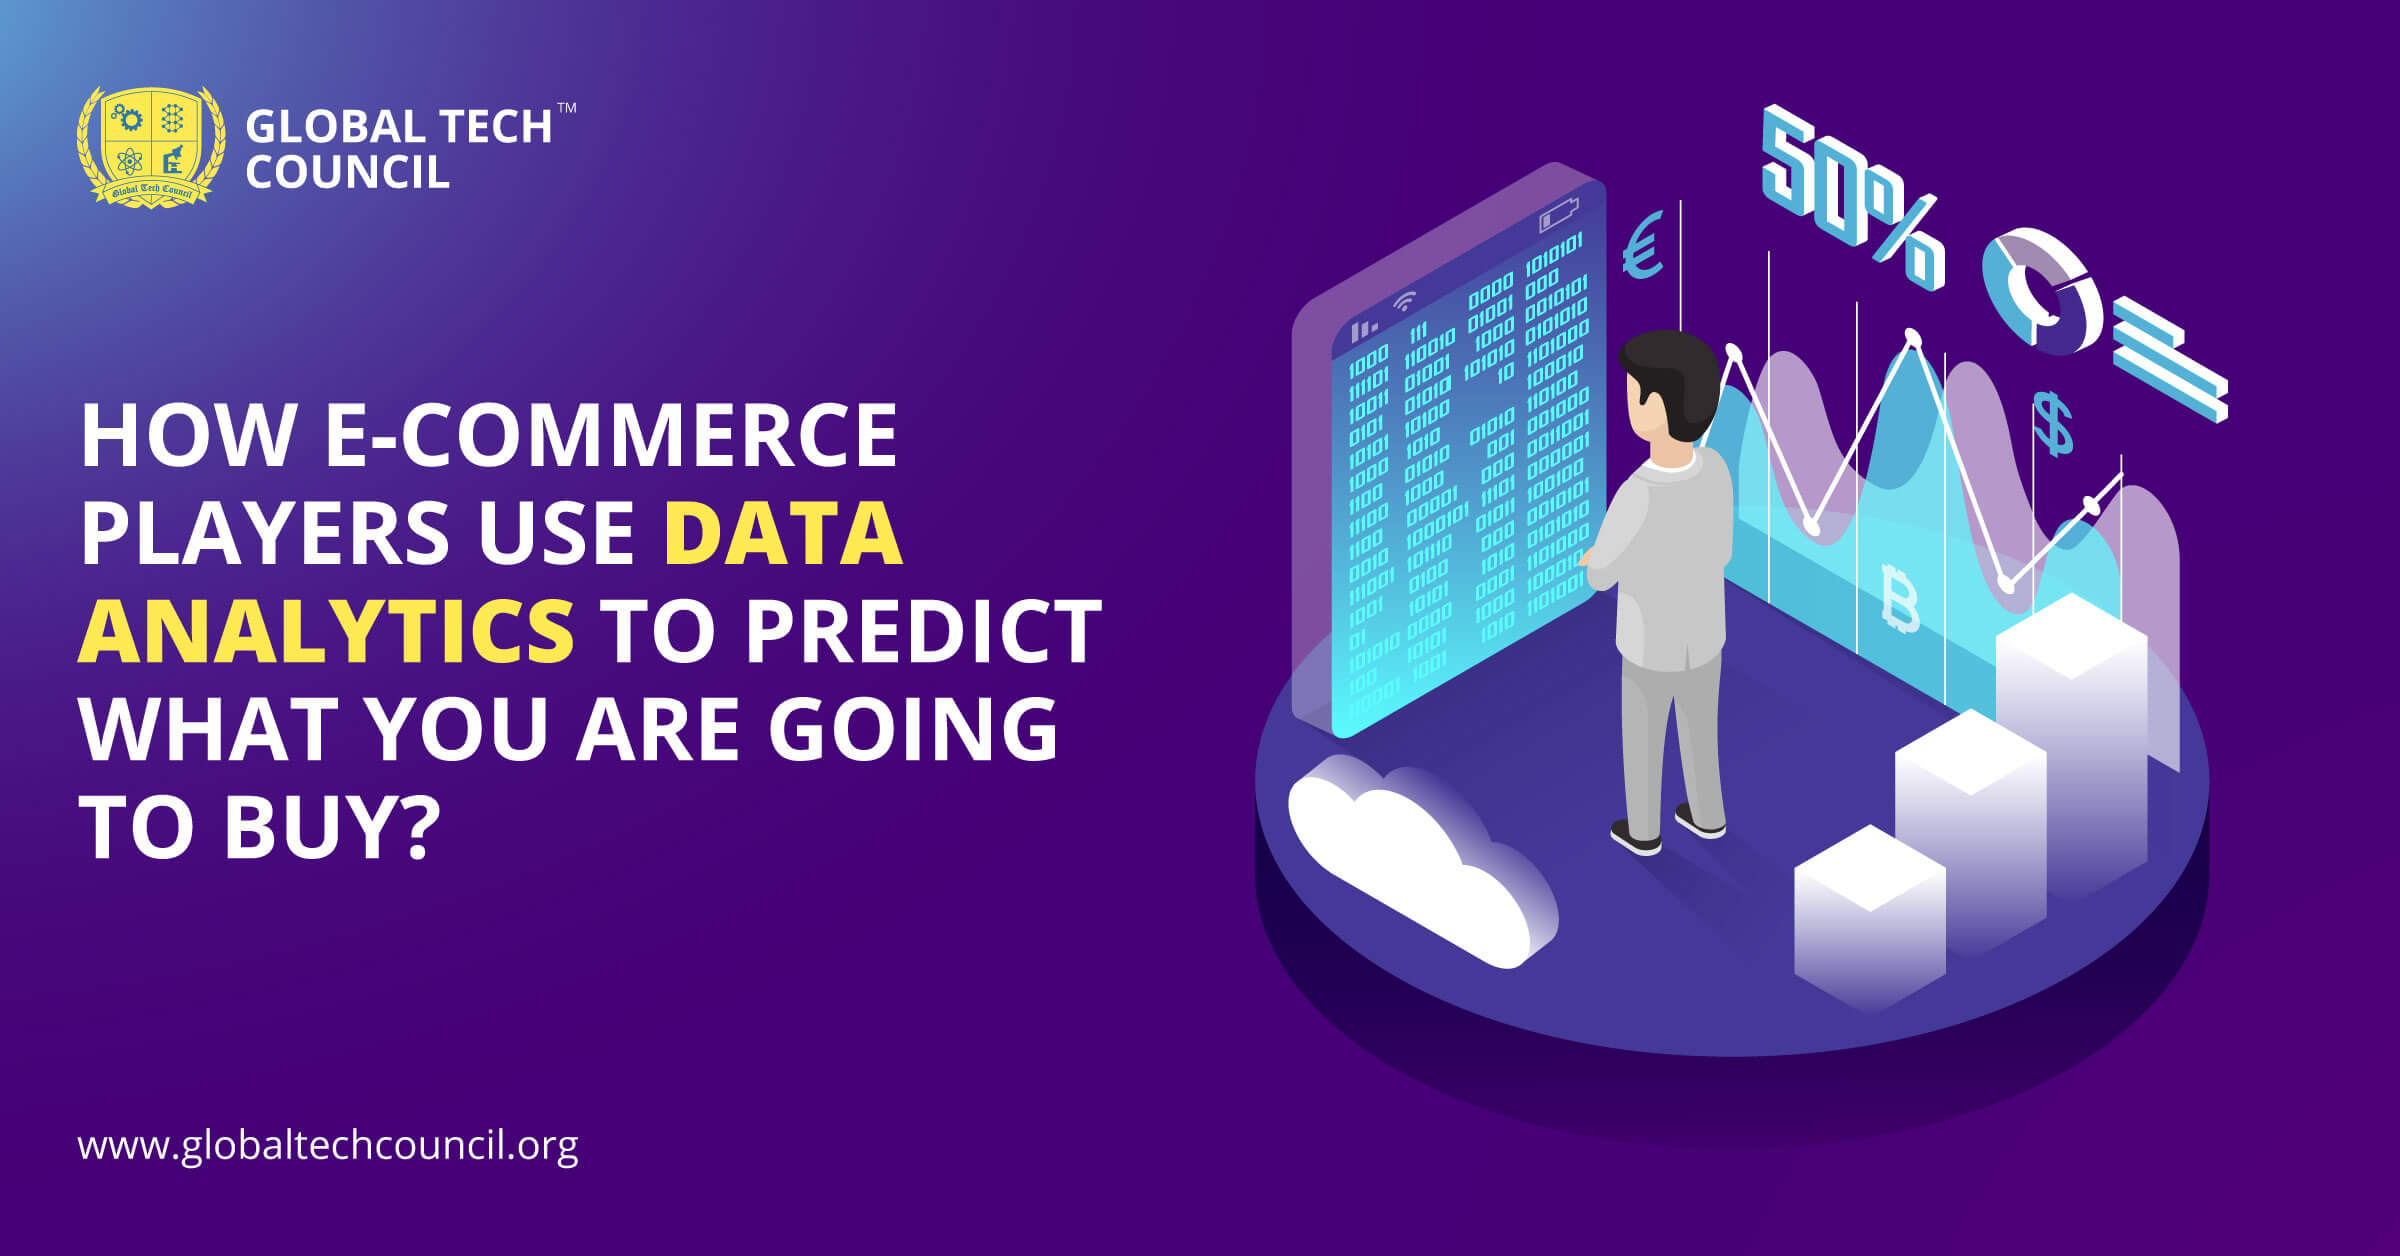 How-E-commerce-players-use-data-analytics-to-predict-what-you-are-going-to-buy